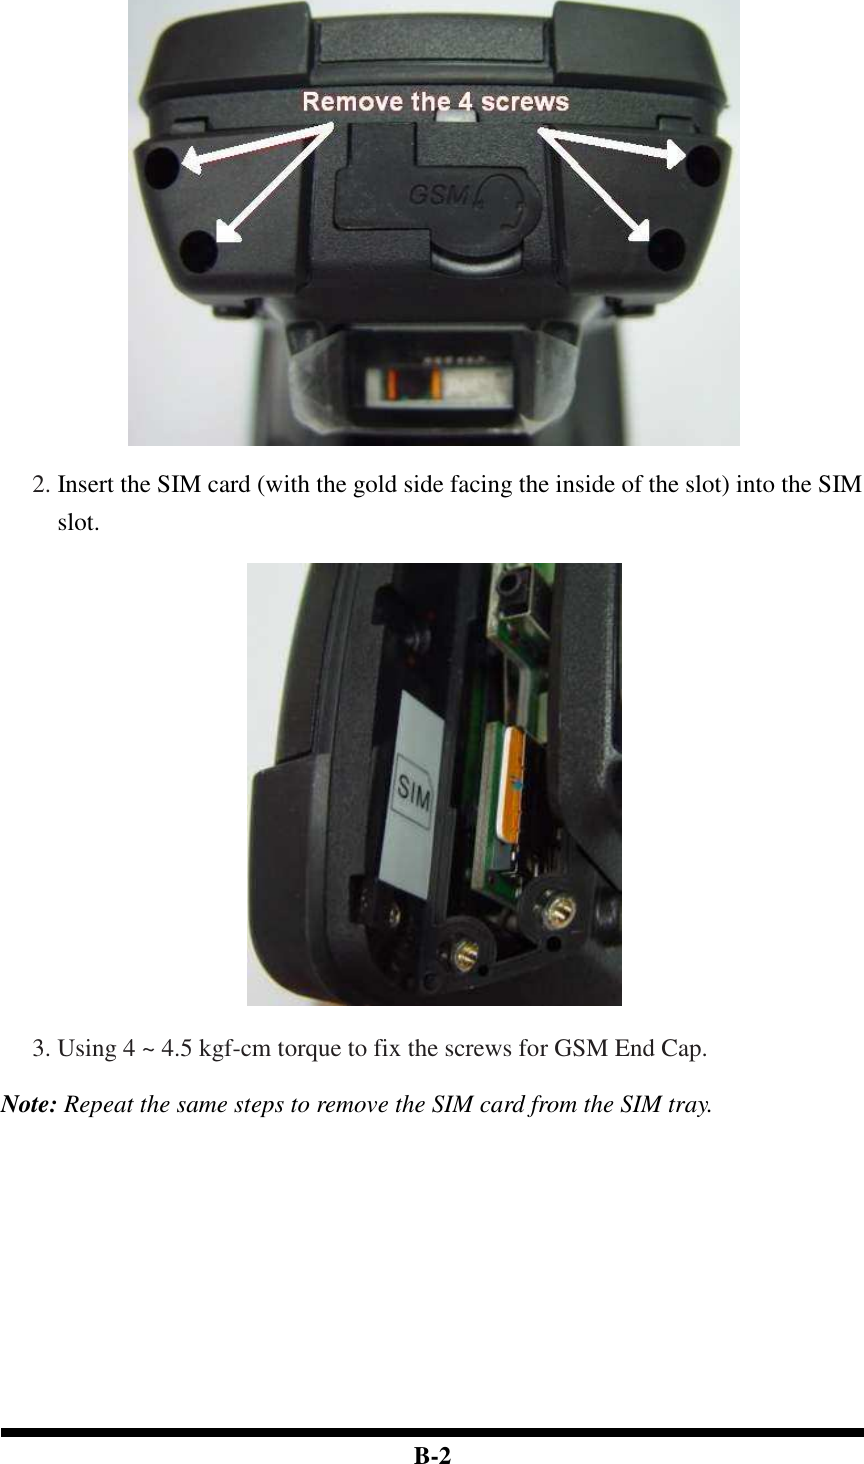  B-2   2. Insert the SIM card (with the gold side facing the inside of the slot) into the SIM slot.    3. Using 4 ~ 4.5 kgf-cm torque to fix the screws for GSM End Cap.  Note: Repeat the same steps to remove the SIM card from the SIM tray.                